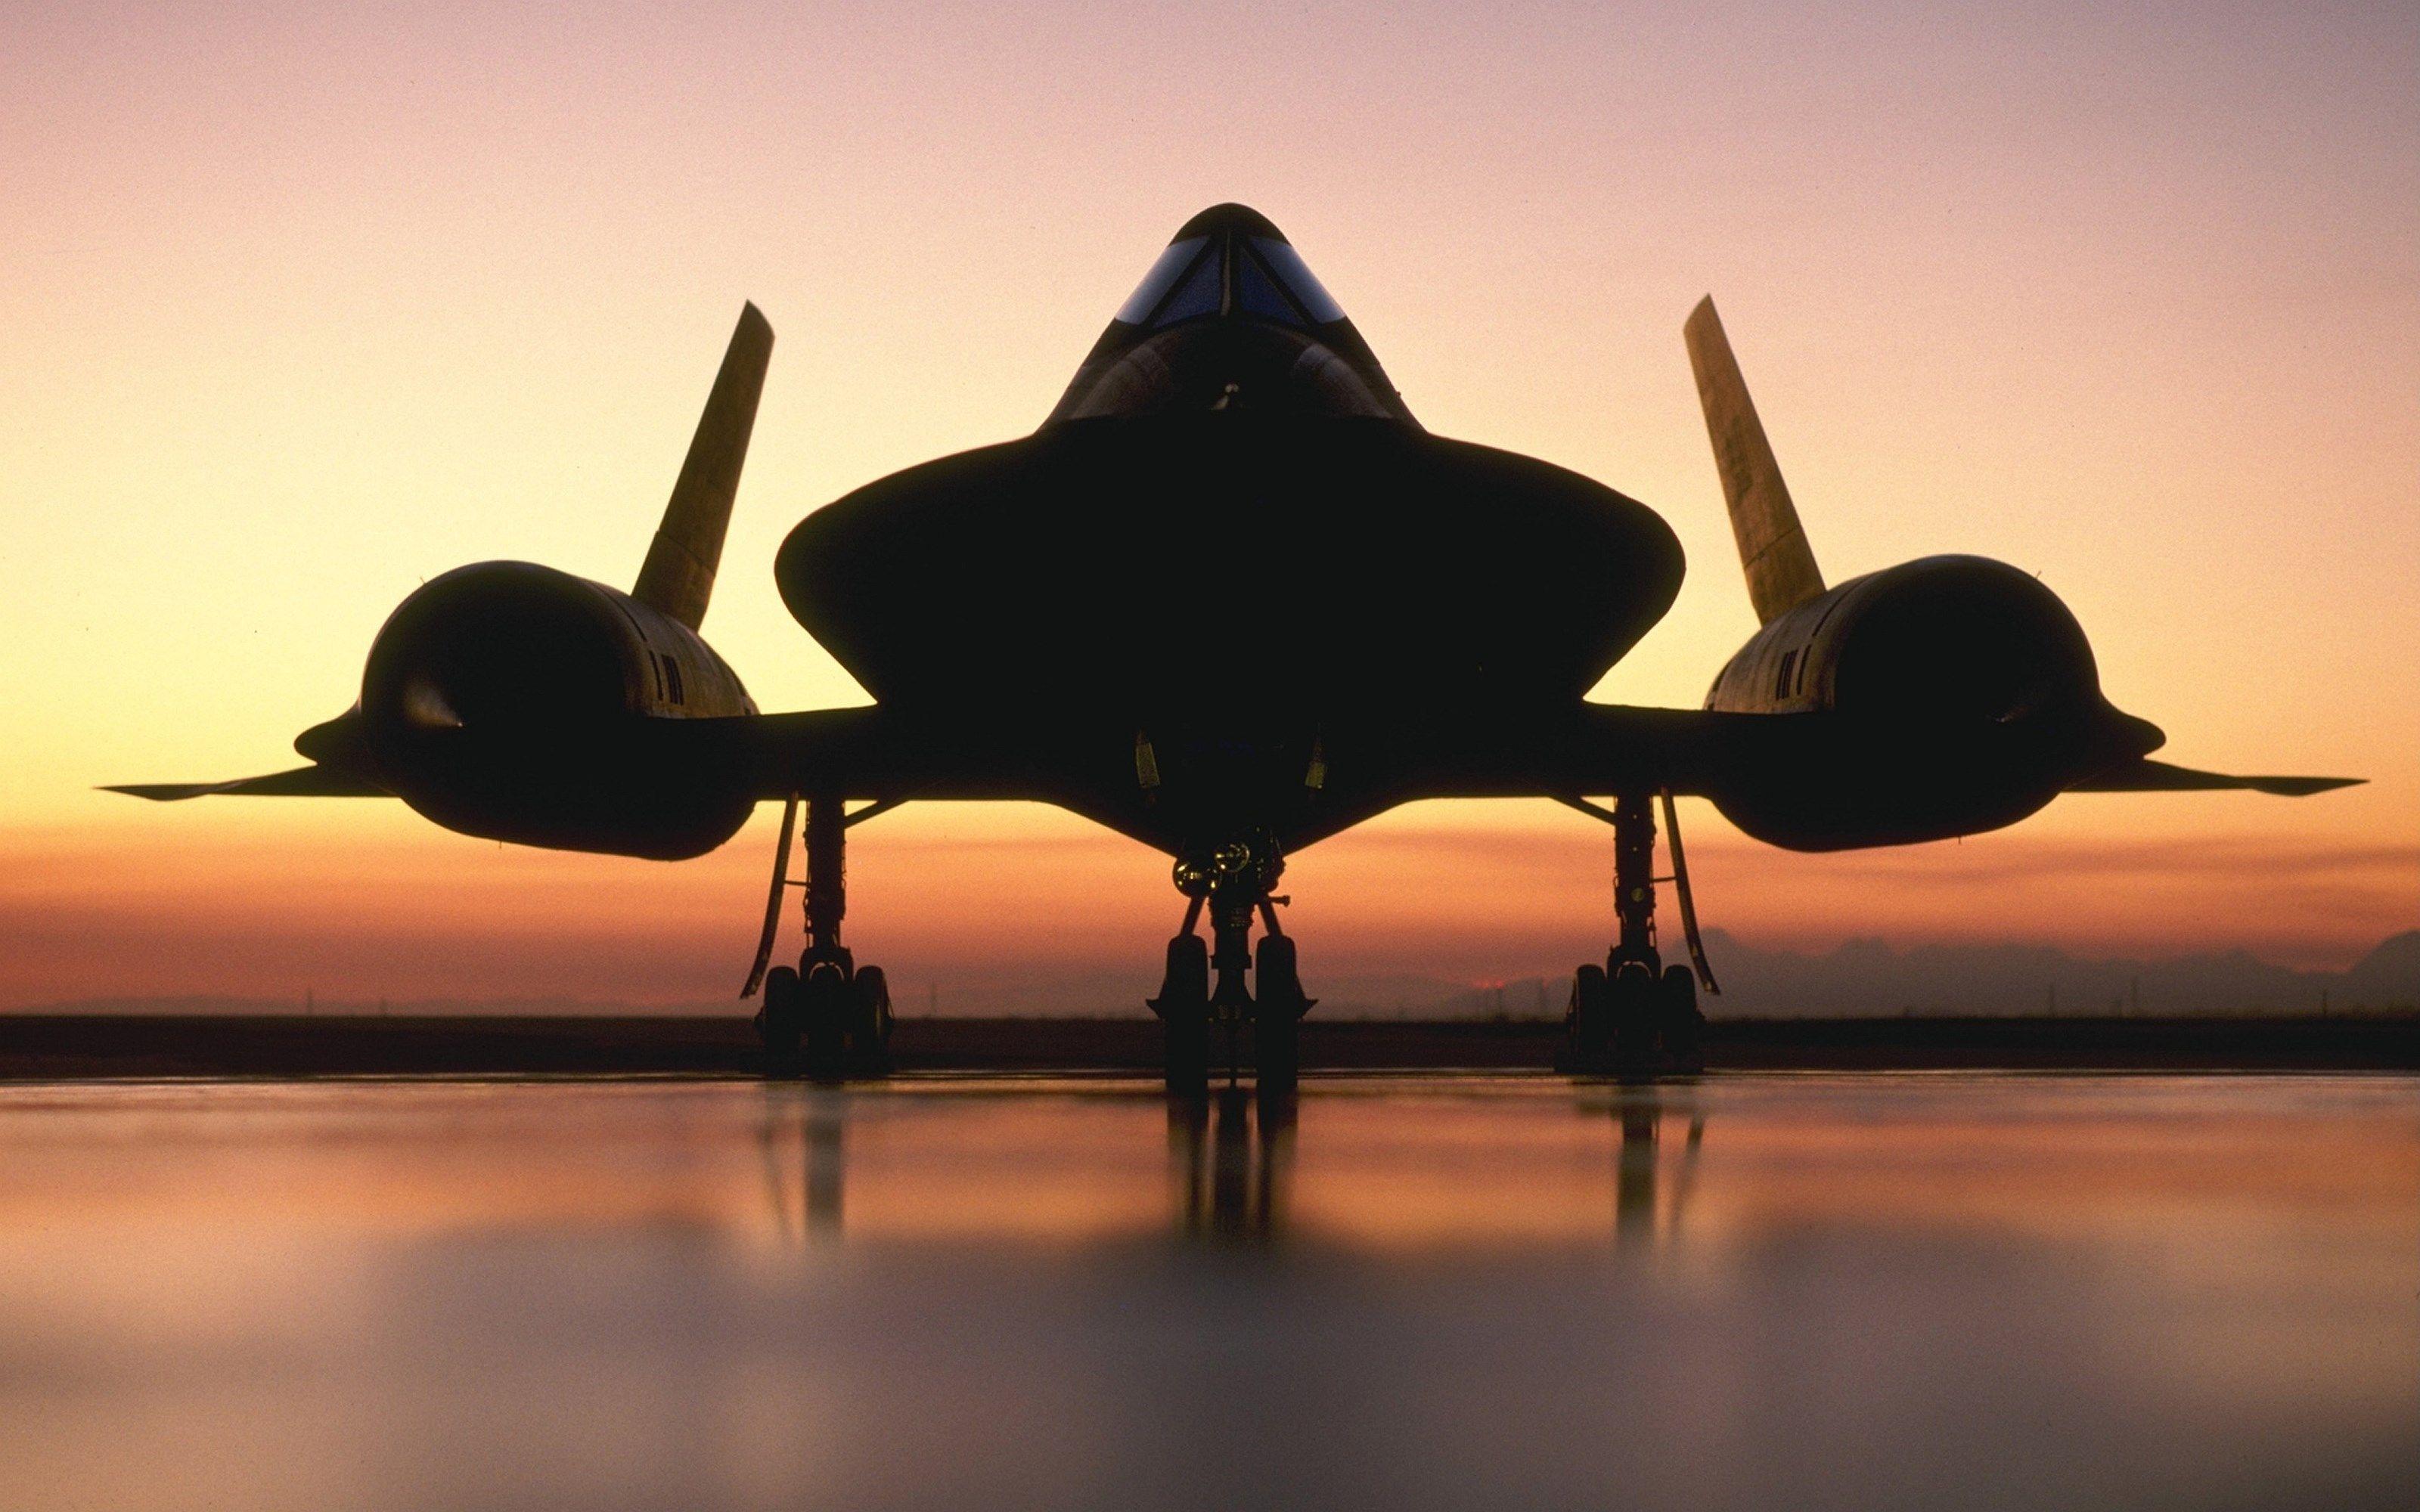 lockheed sr 71 blackbird wallpapers and backgrounds.